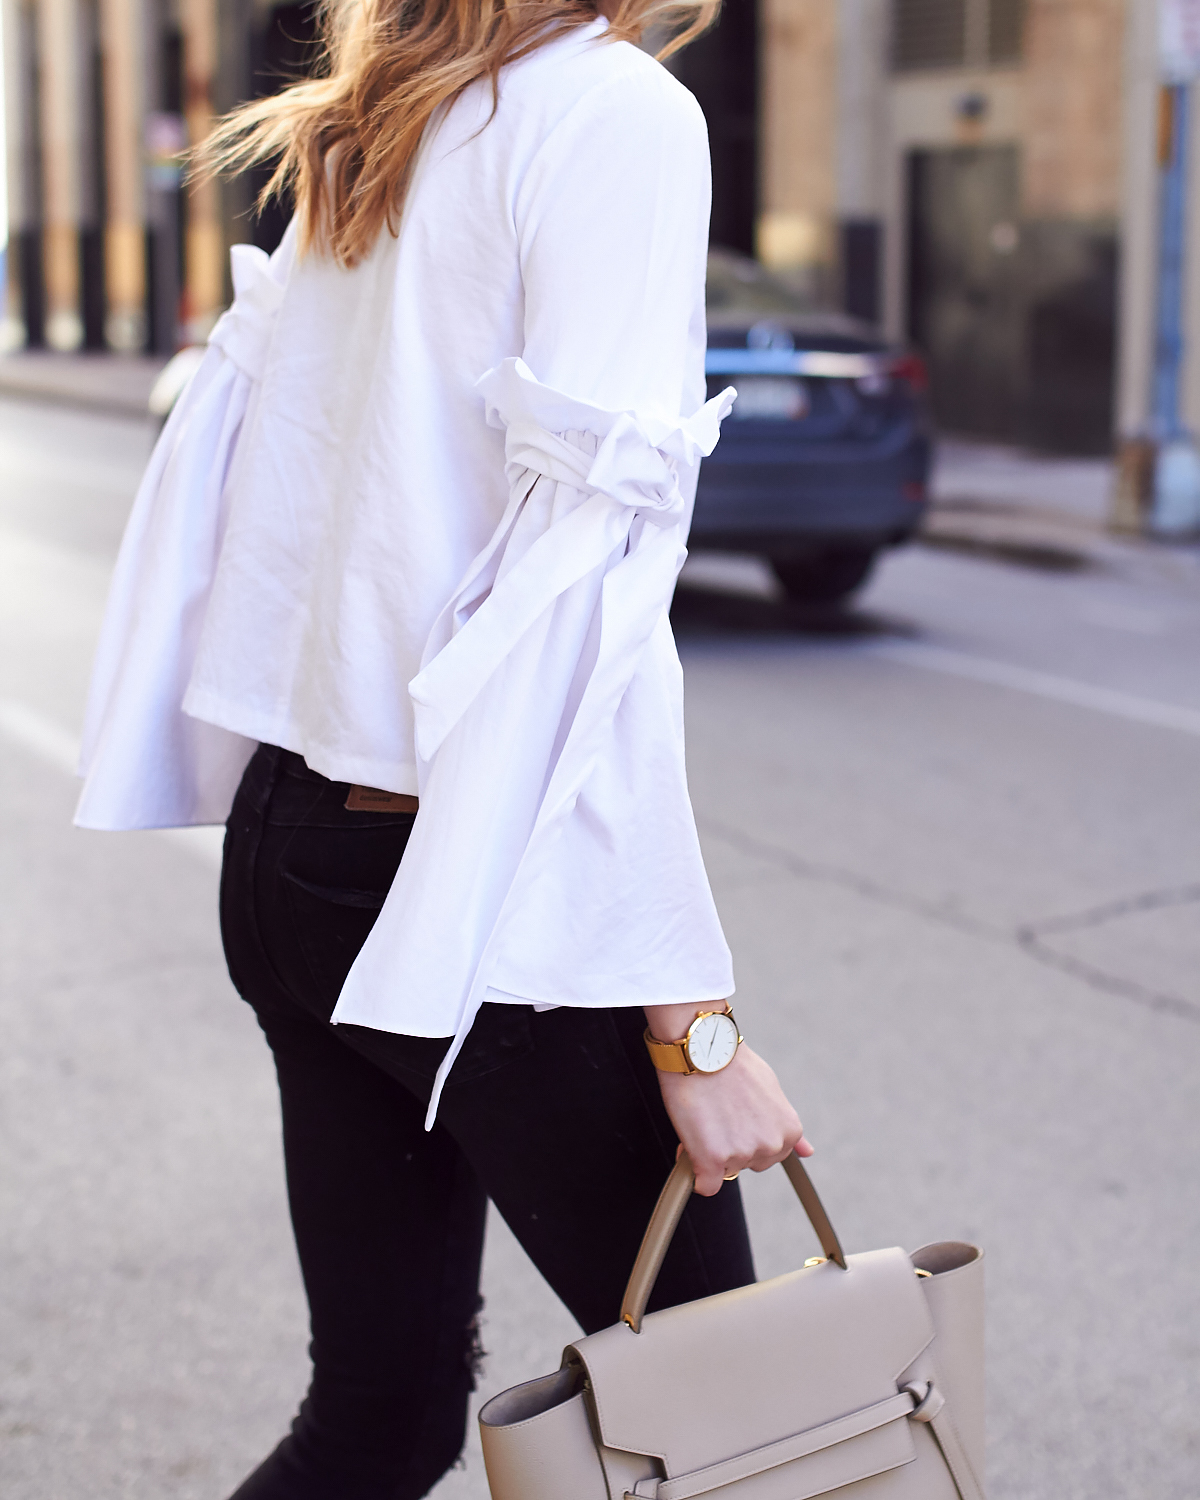 Fall Outfit, White Ruffle Sleeve Top, Black Ripped Skinny Jeans, Celine Tie Belt Bag